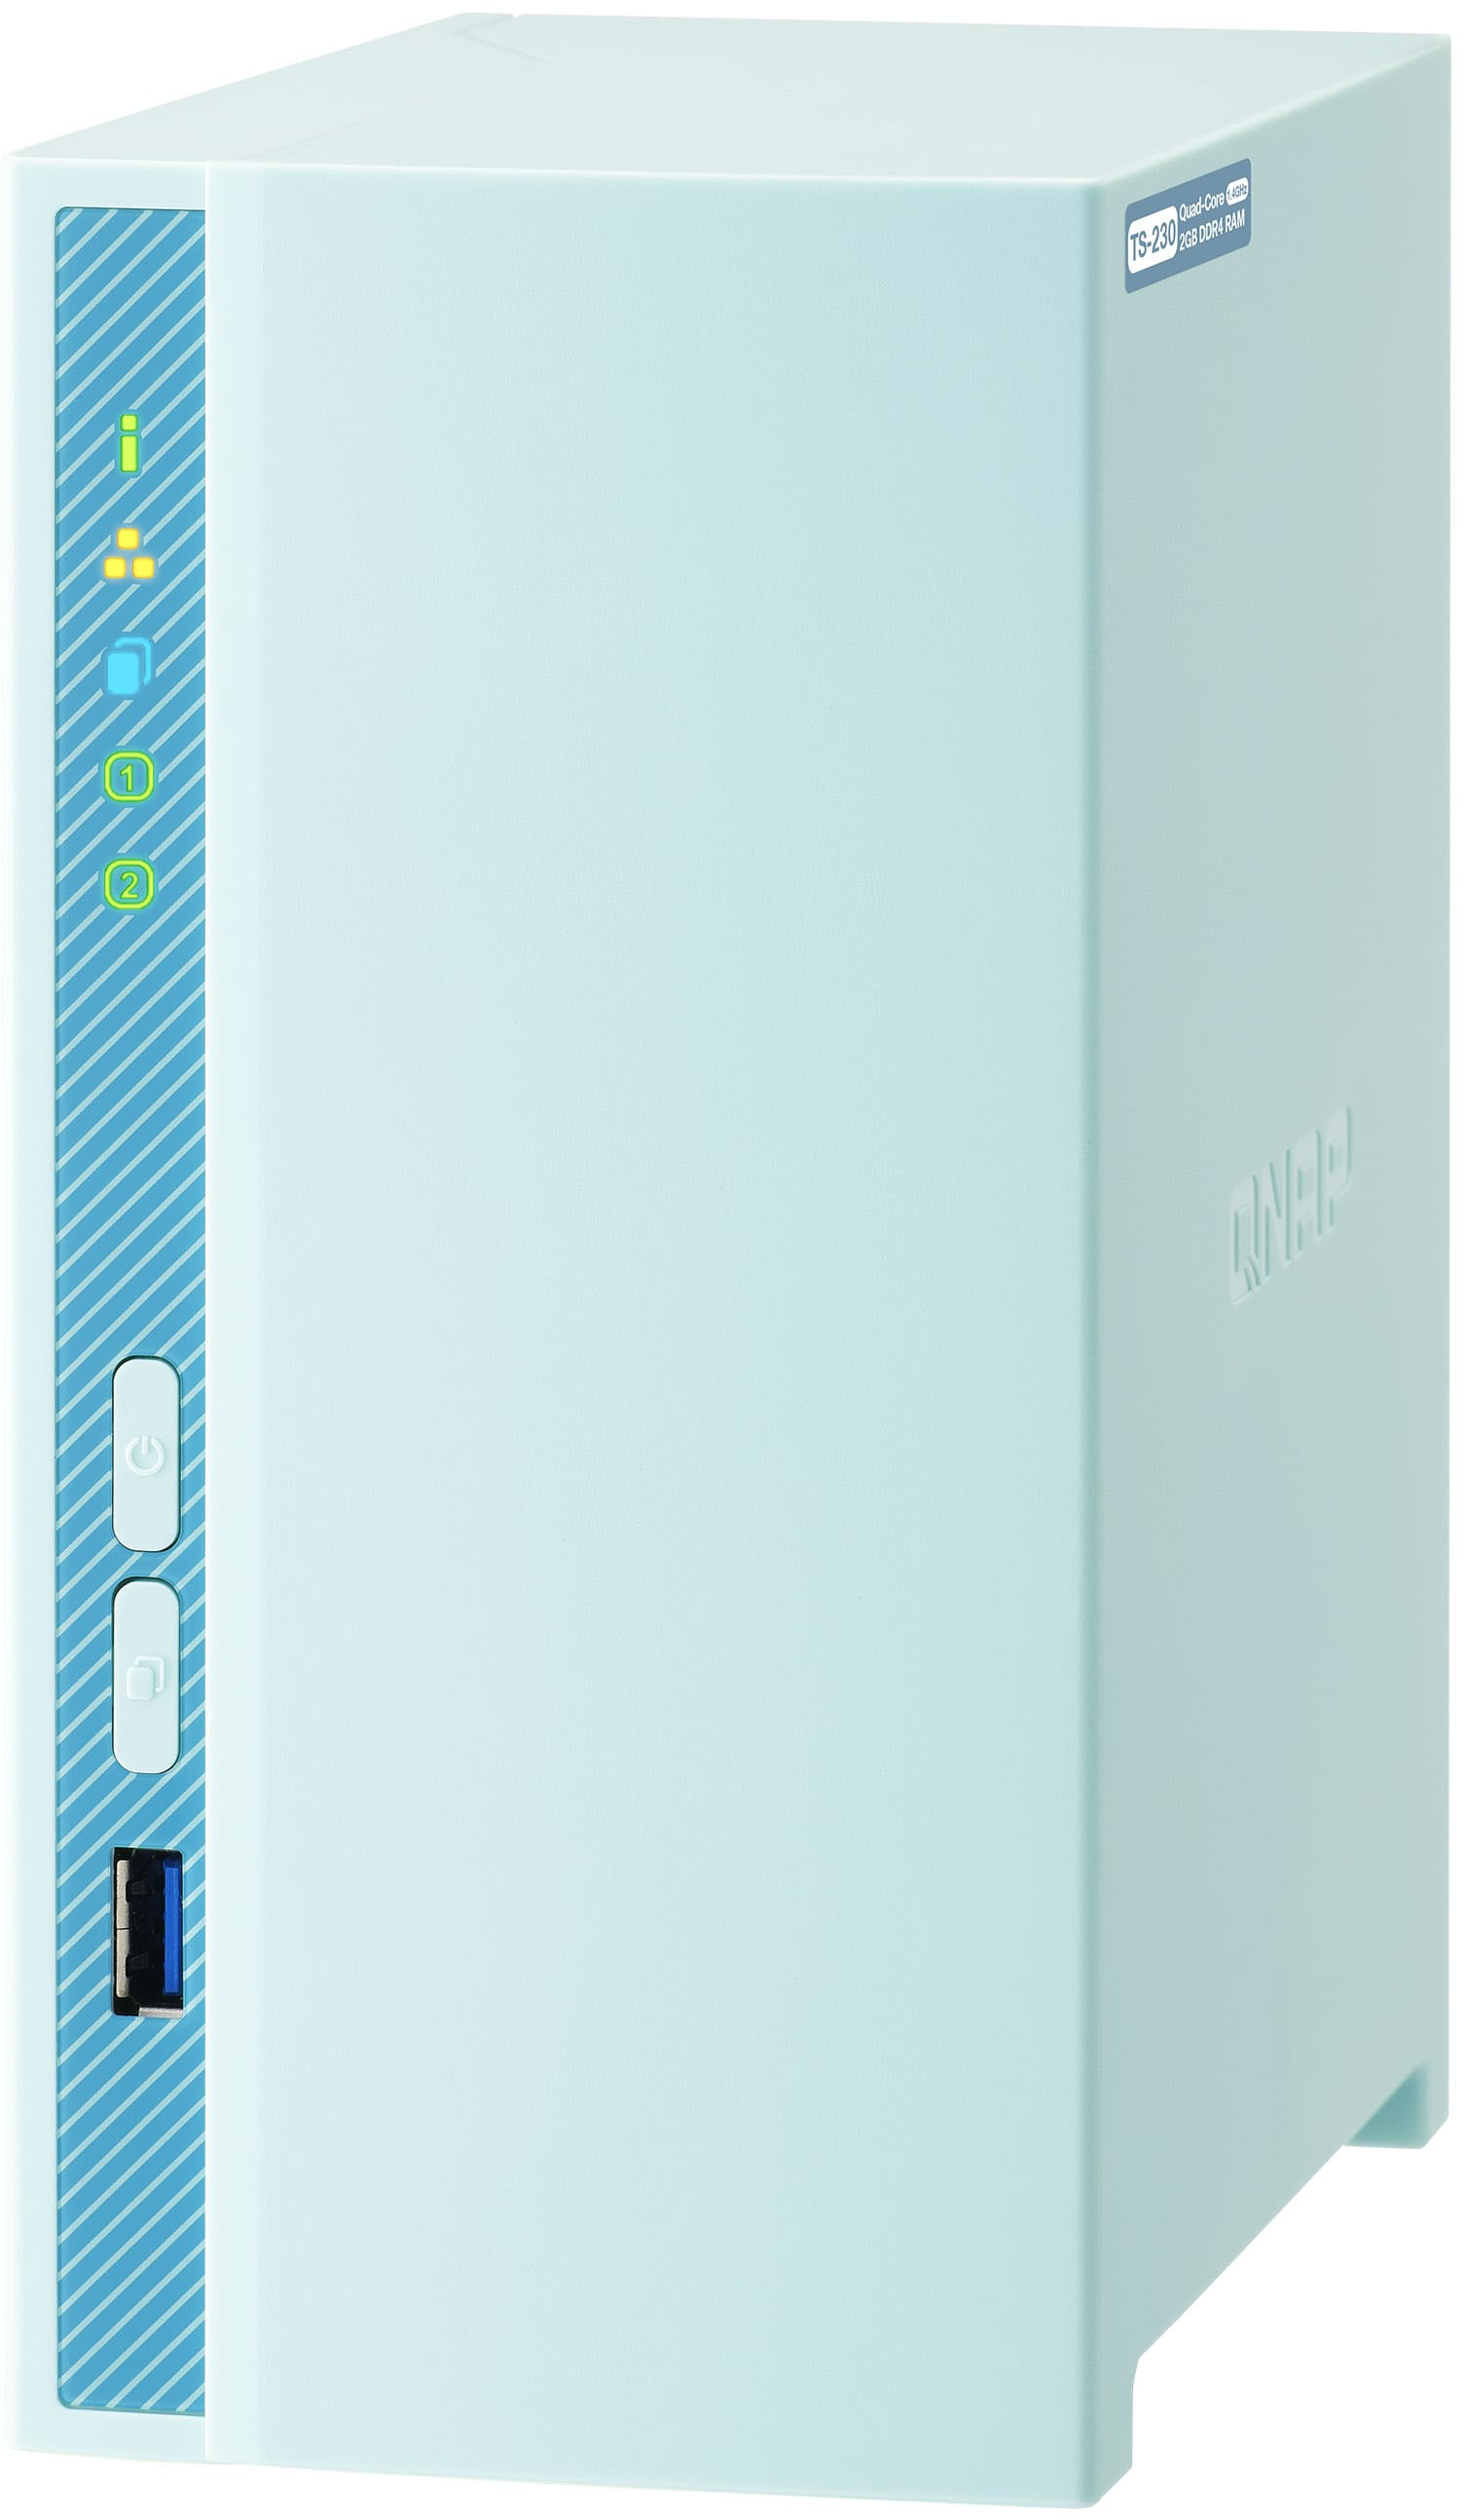 Angle View: QNAP - TS-230 2-Bay, Realtek RTD1296 2GB DDR4 RAM On-Board, External Network Attached Storage (NAS) - White